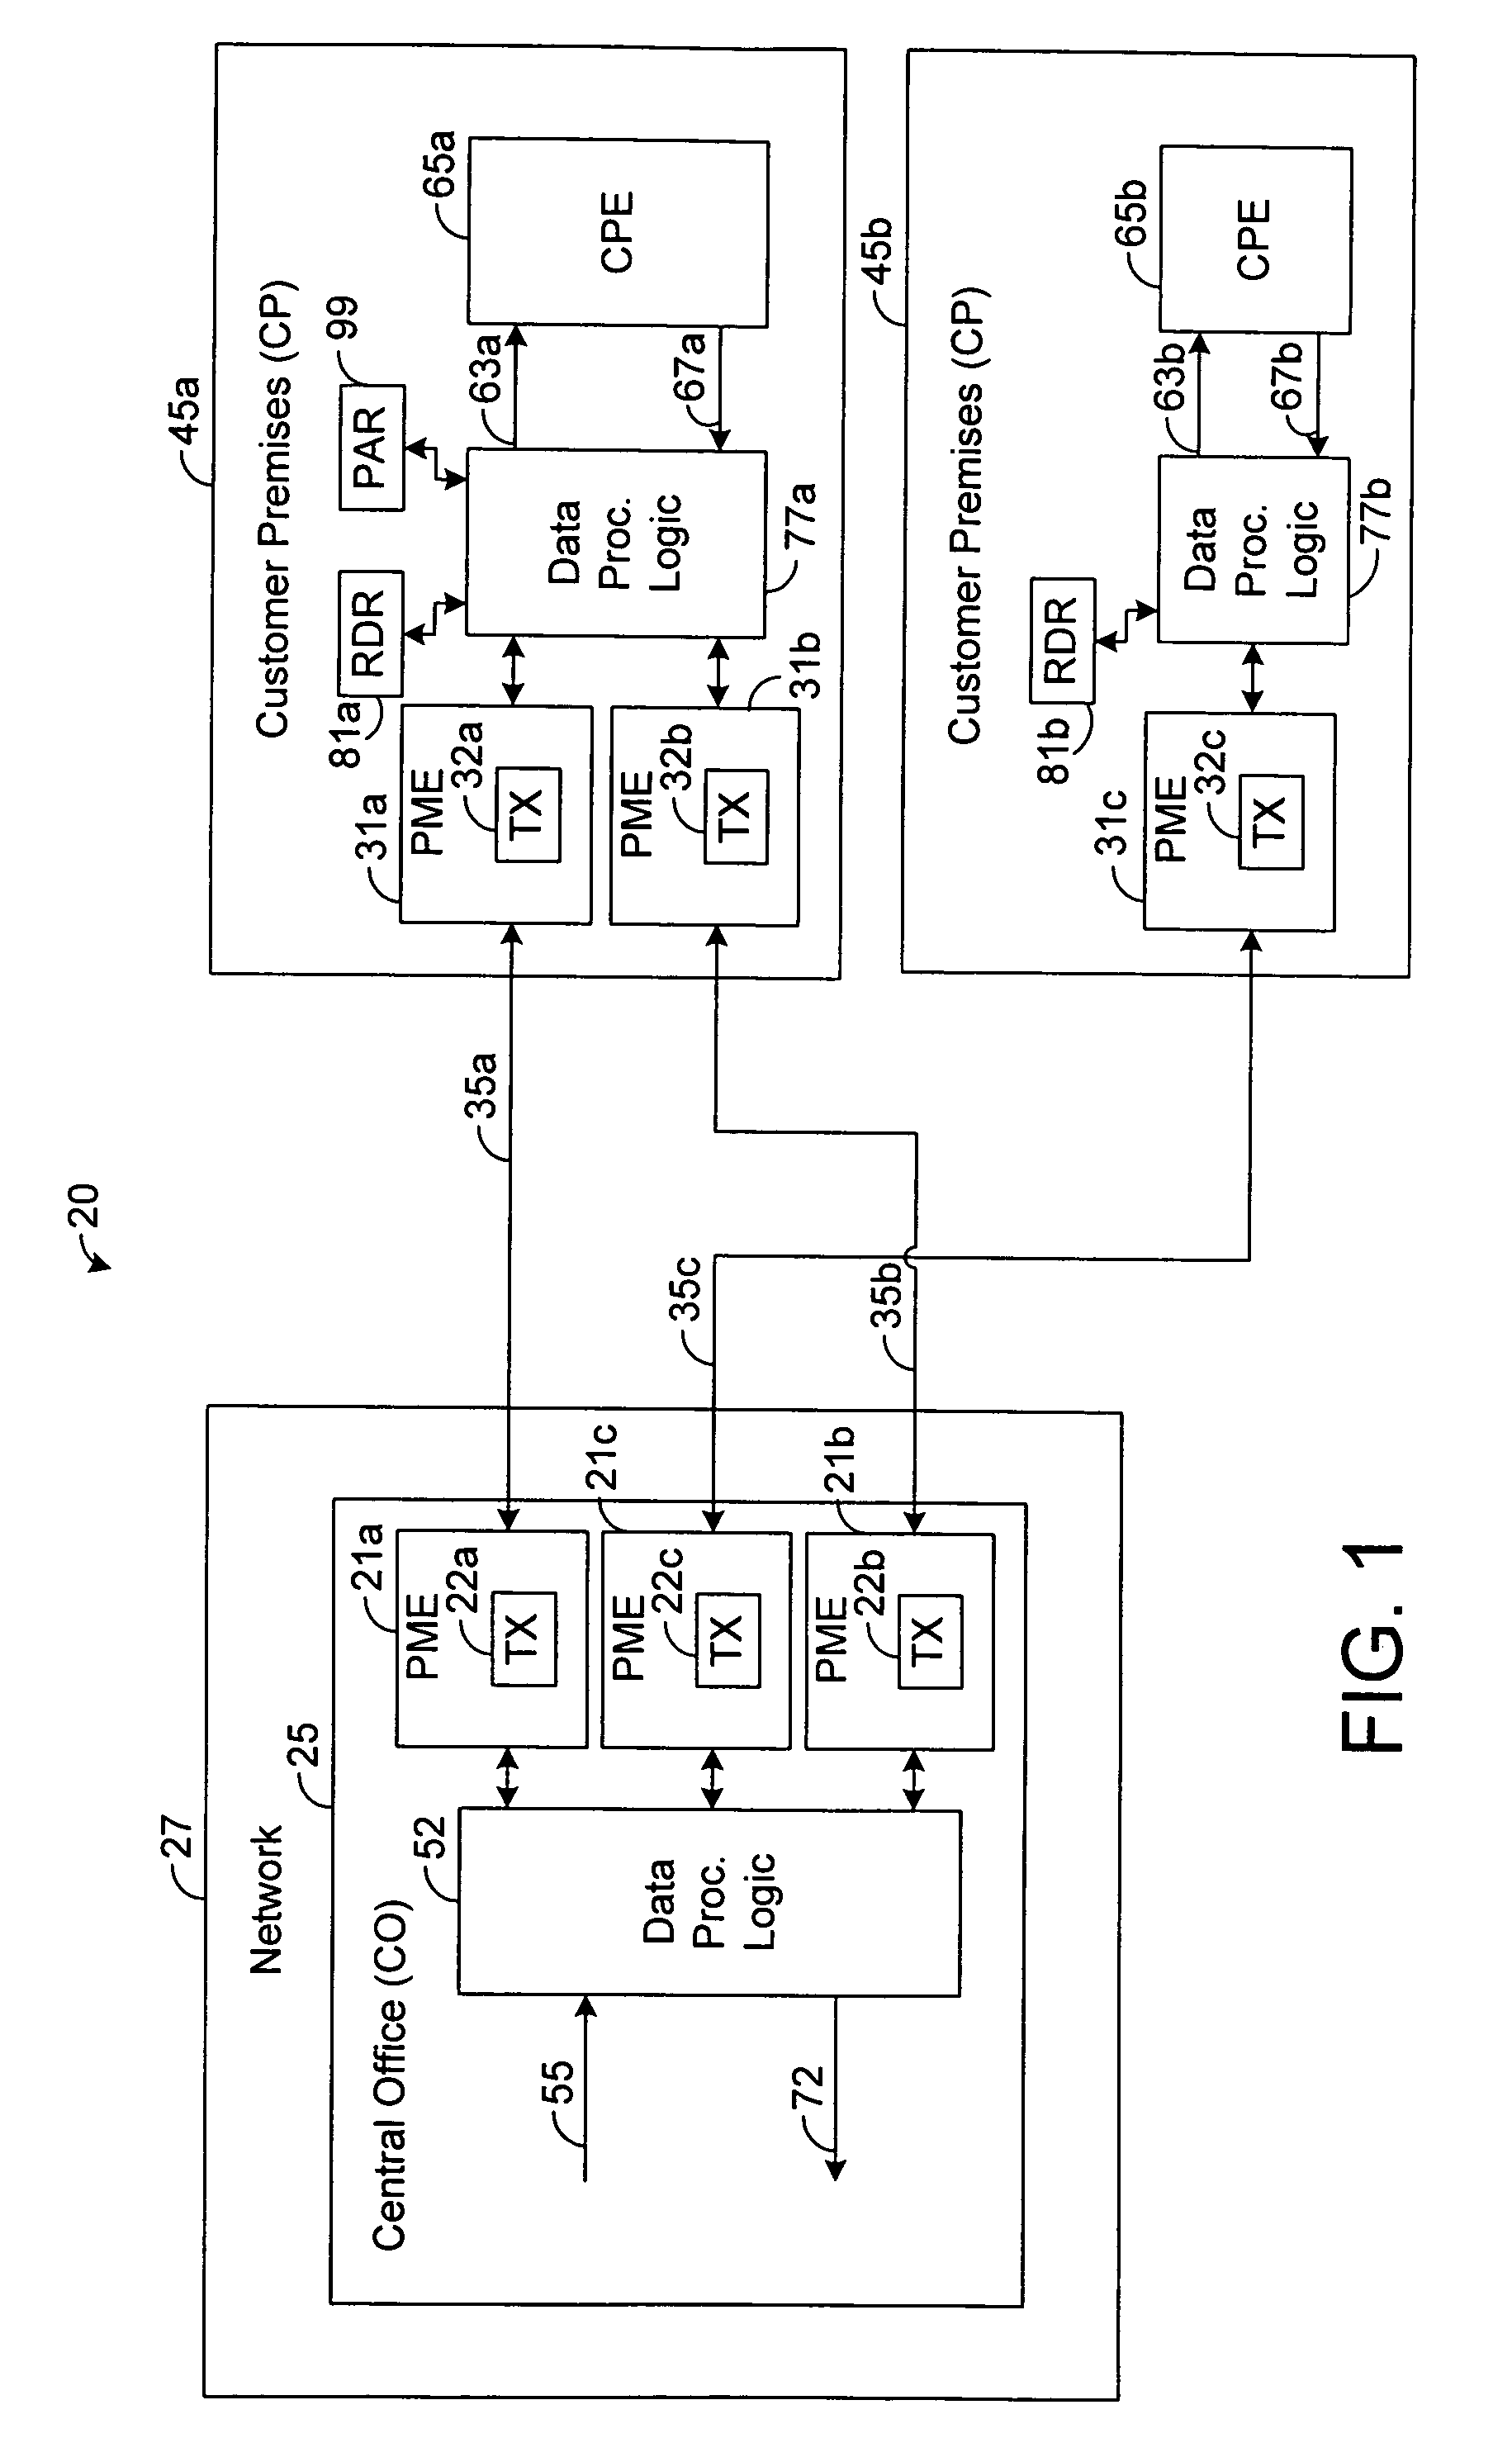 Systems and methods for discovering PME bonding groups